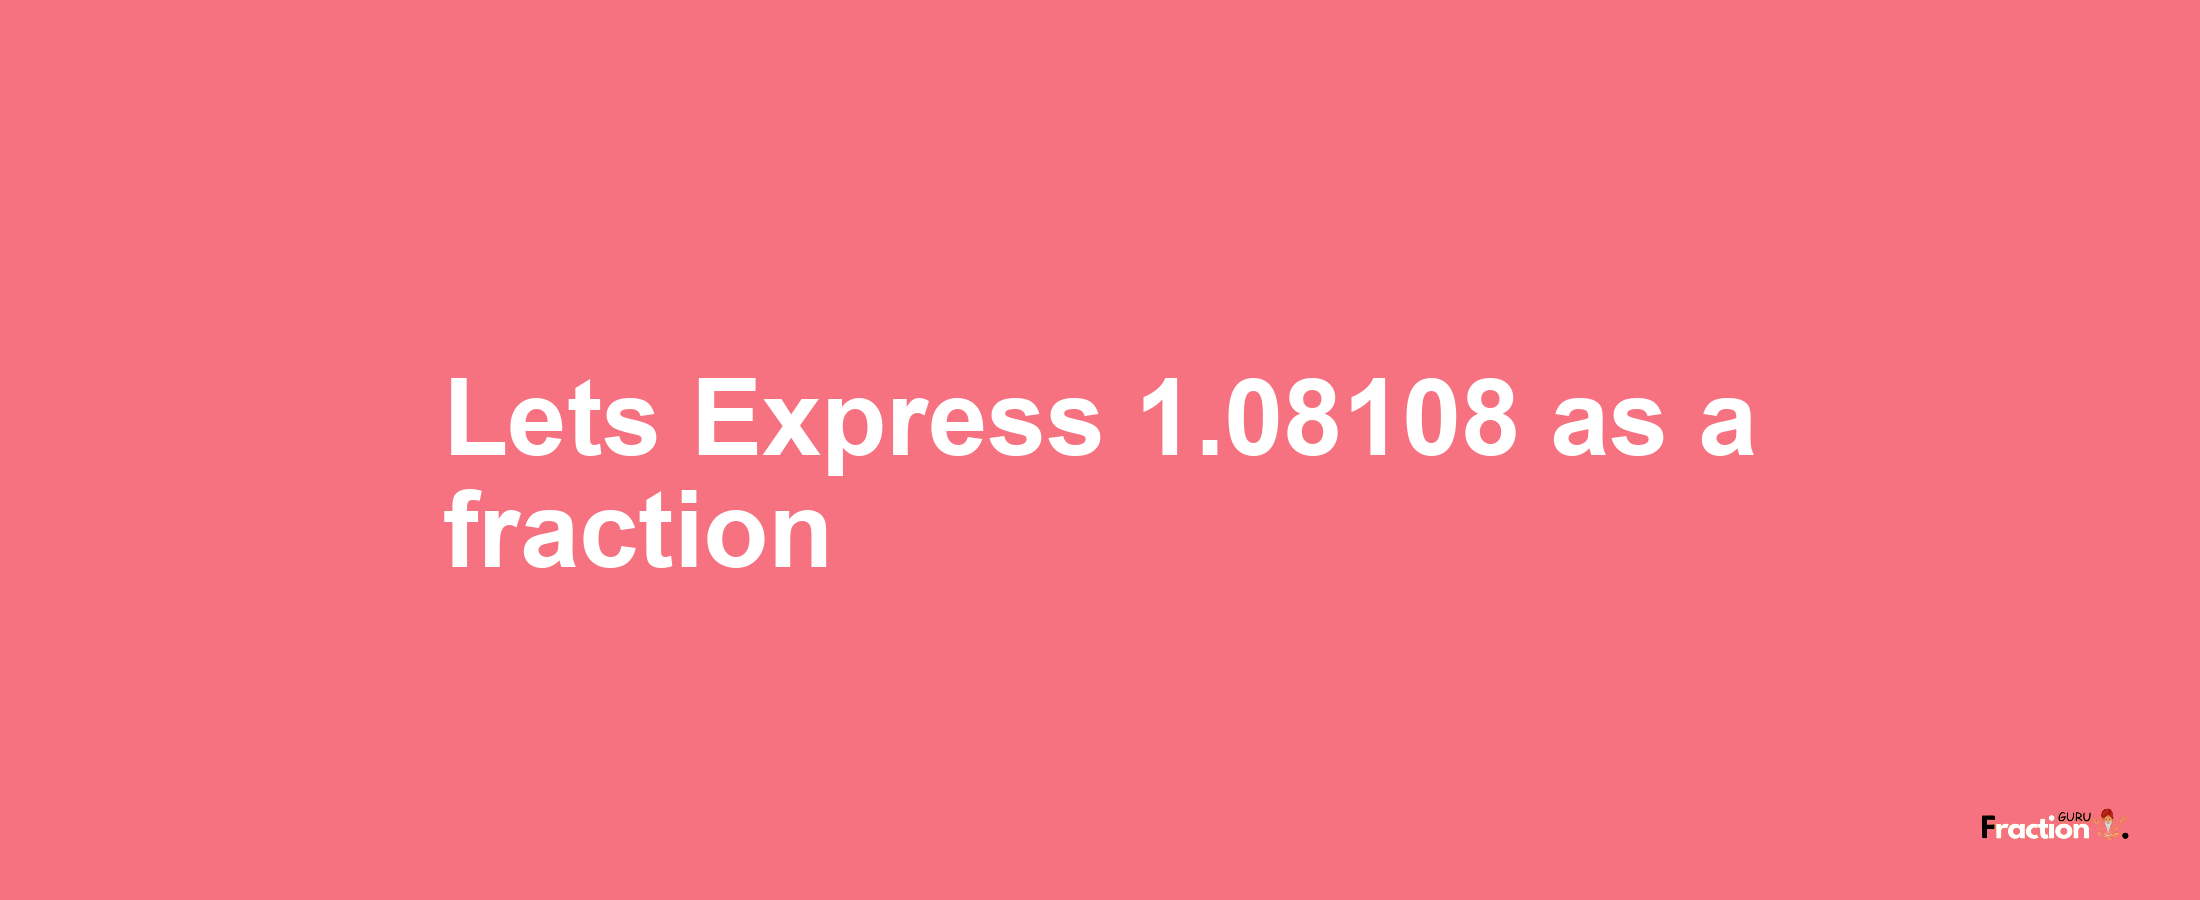 Lets Express 1.08108 as afraction